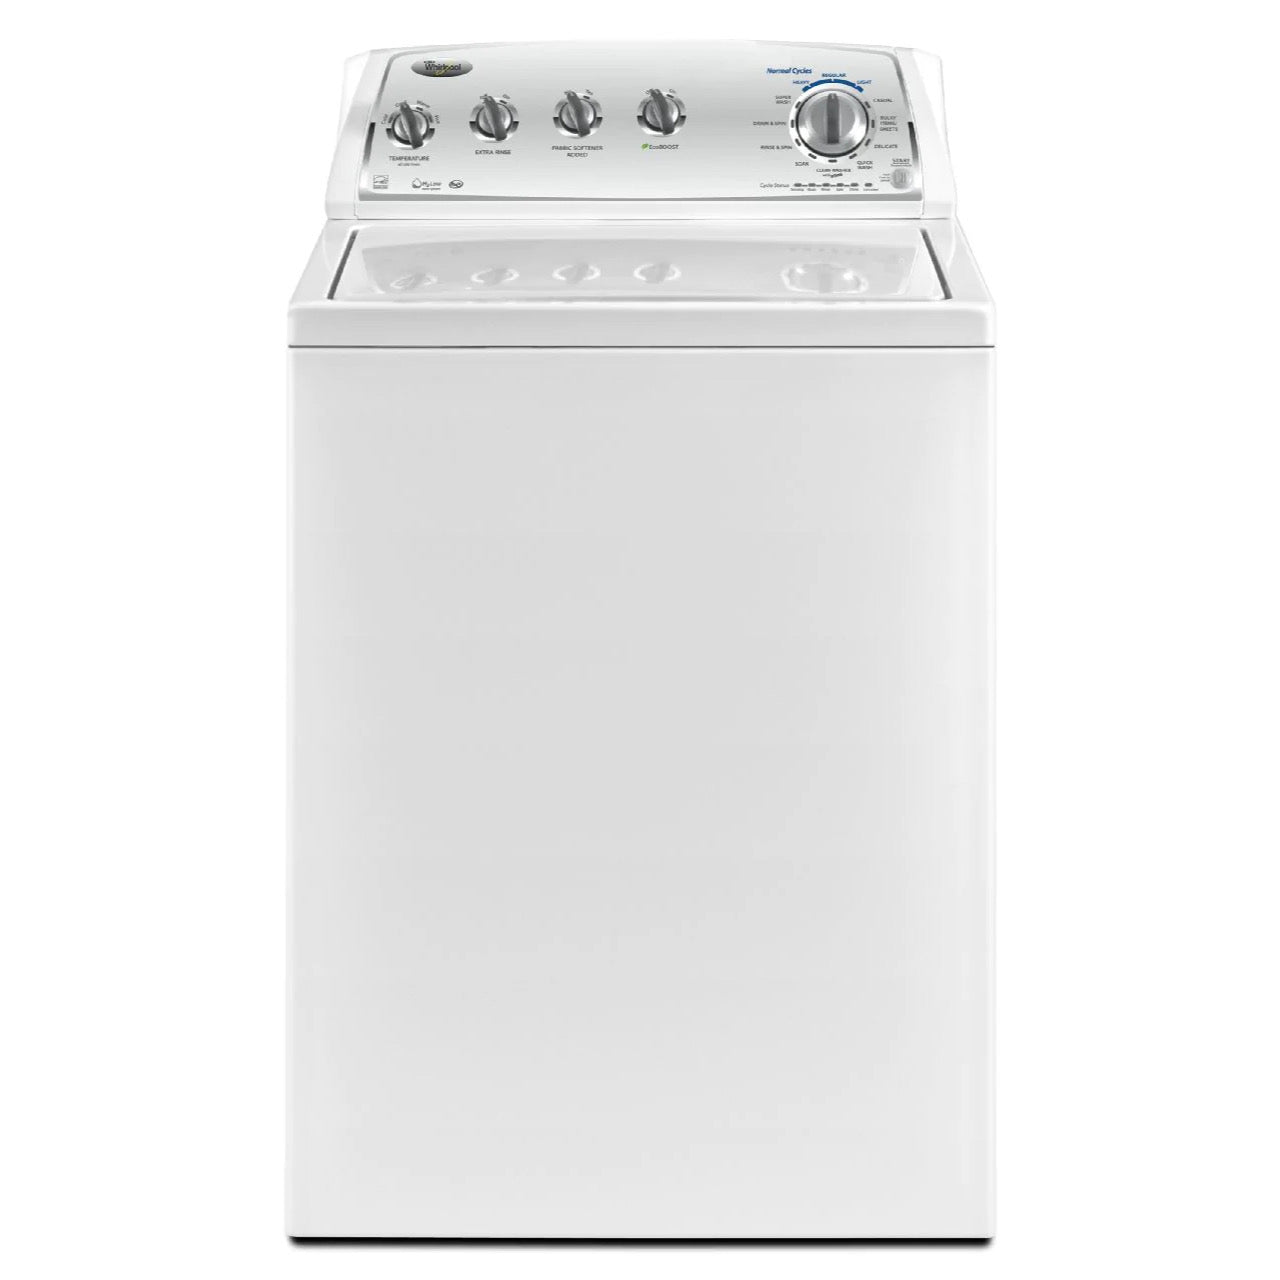 USED: Whirlpool WTW4950XW 27 Inch Top-Load Washer with 3.6 cu. ft. Capacity, 12 Cycles, 4 Temperatures, H2Low Sensor Wash, EcoBoost Option, Cycle Status Bar, CEE Tier III Energy Star Qualified and Quiet Spin Technology